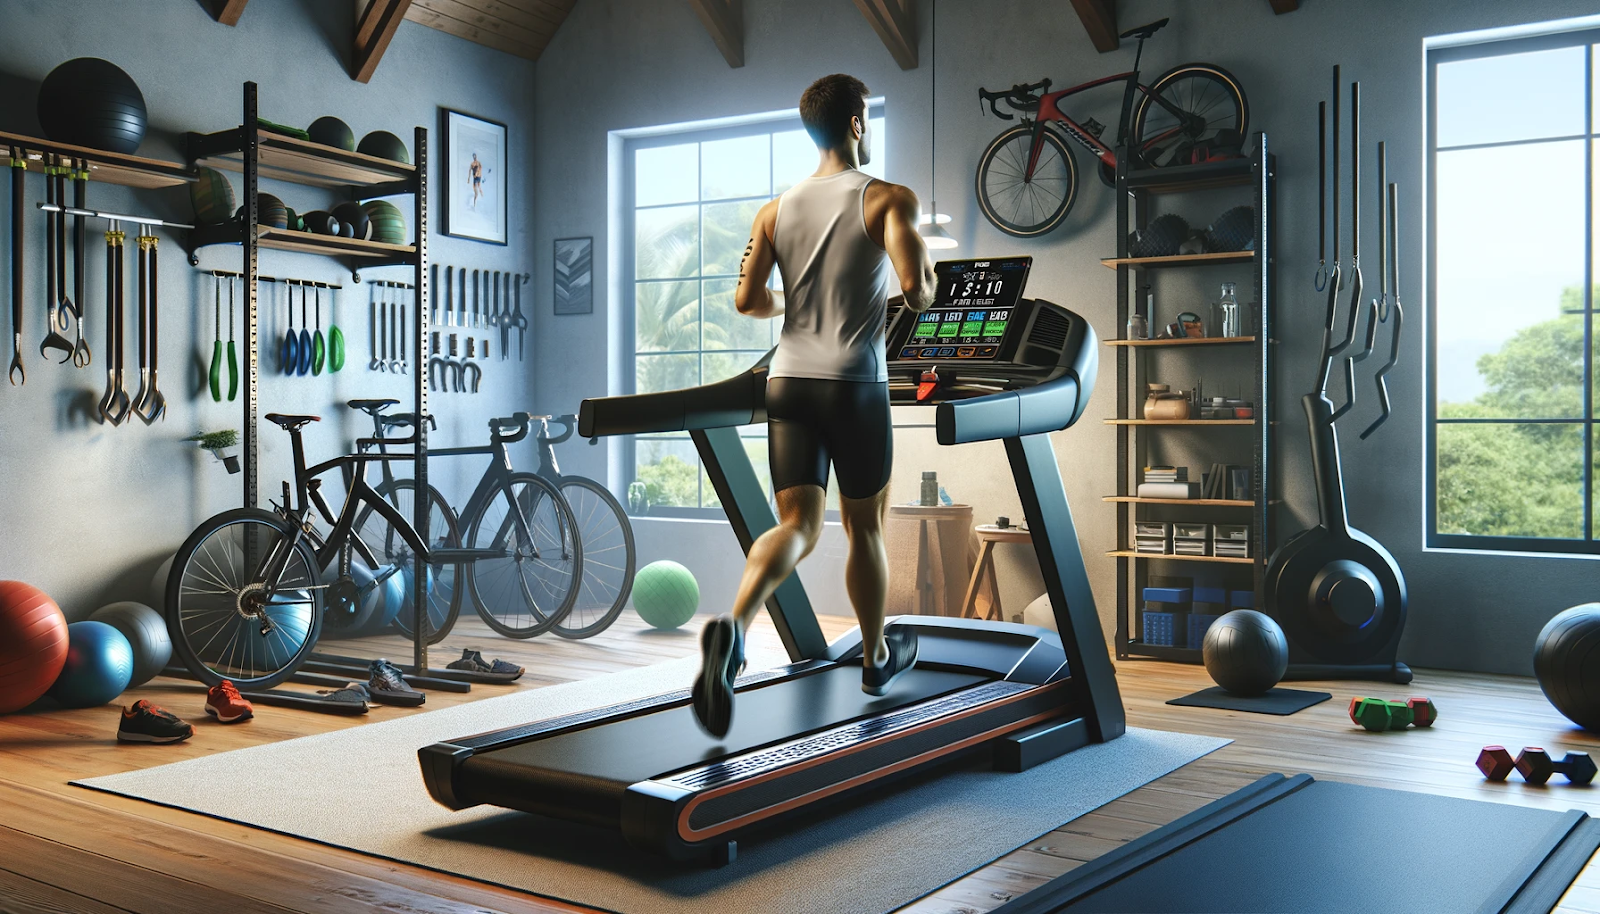 A male athlete using a treadmill in a home gym environment tailored for triathlon training. Surrounding equipment includes bikes and weights, and the treadmill's display highlights settings for speed and a slight incline, emphasizing the controlled and versatile nature of indoor treadmill training for triathlons.